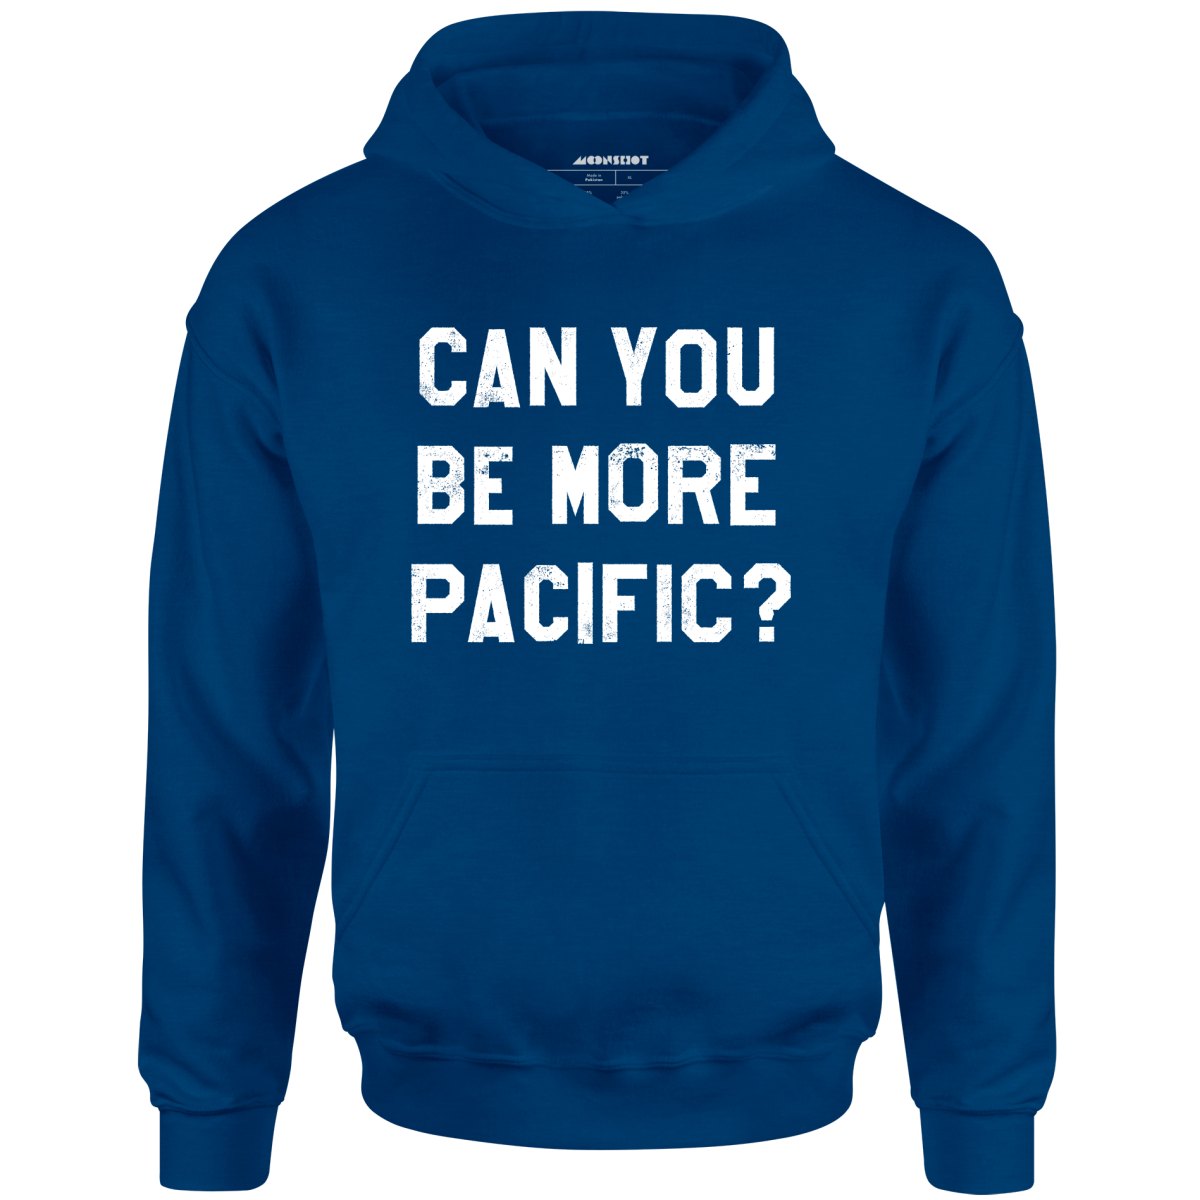 Can You Be More Pacific? - Unisex Hoodie